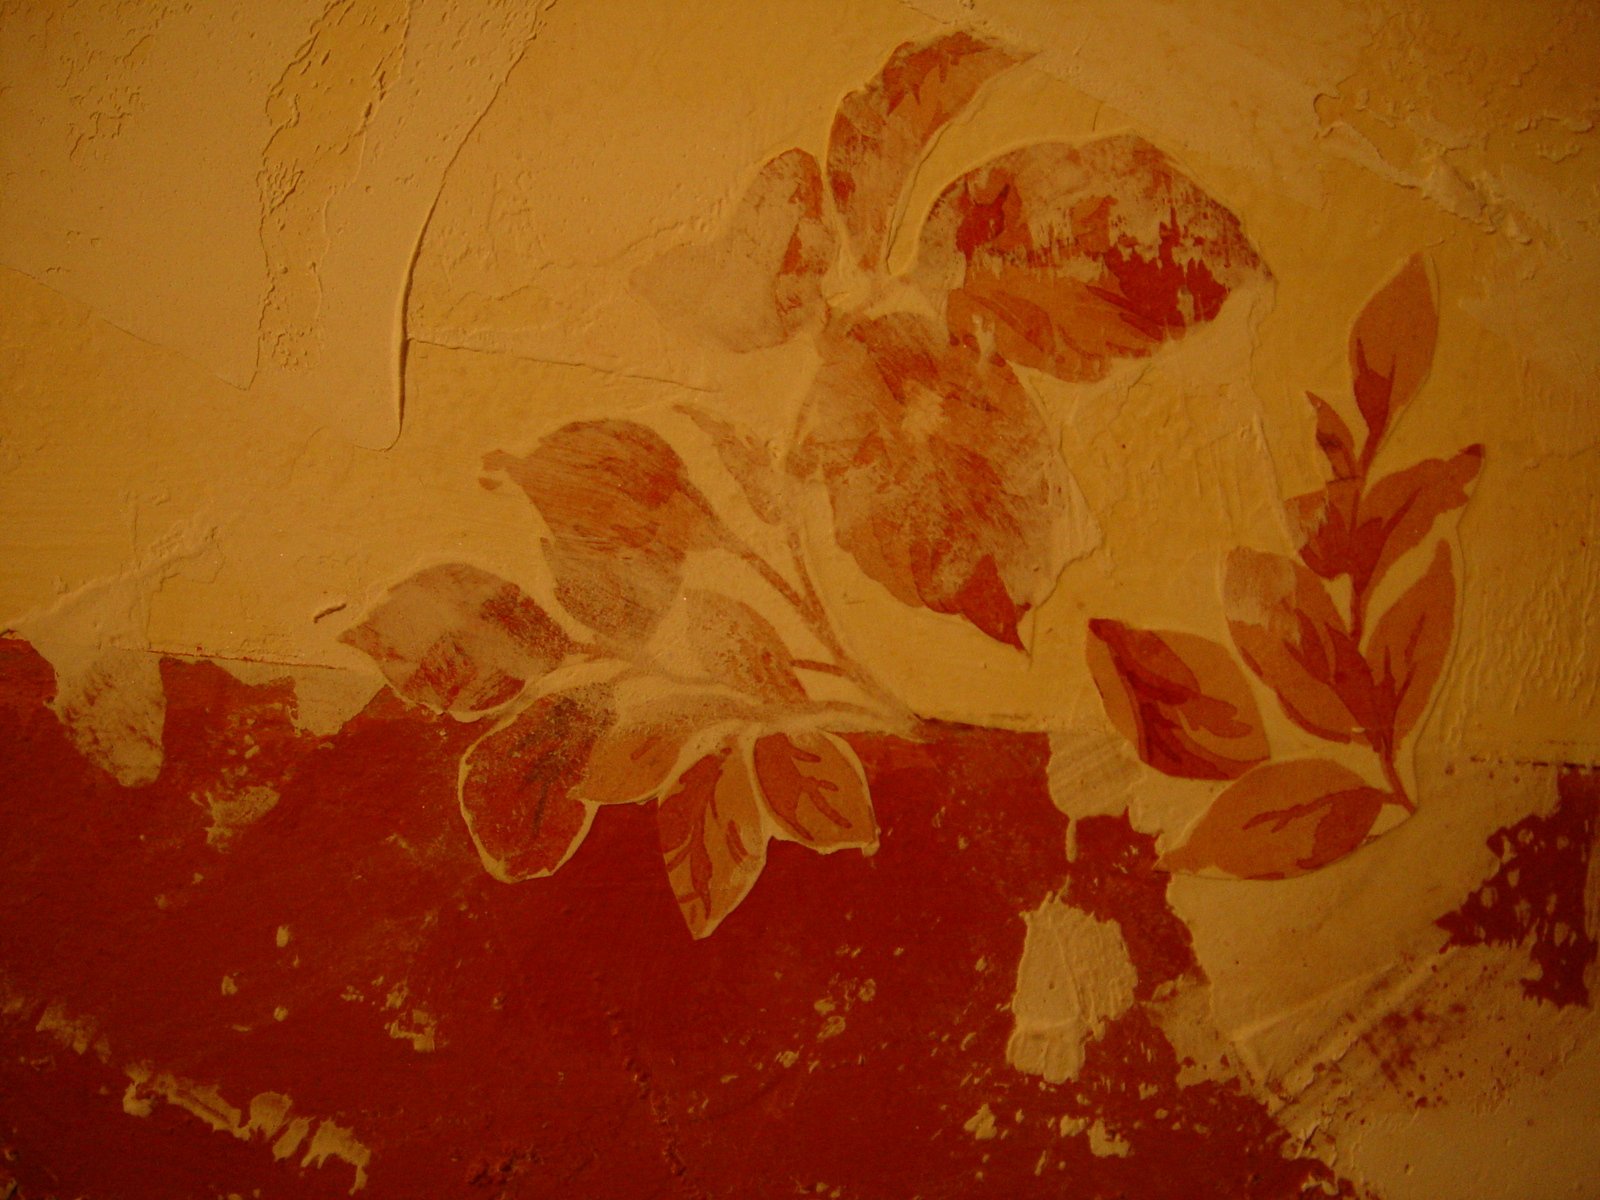 an artistic painting is on the wall and has leaves painted